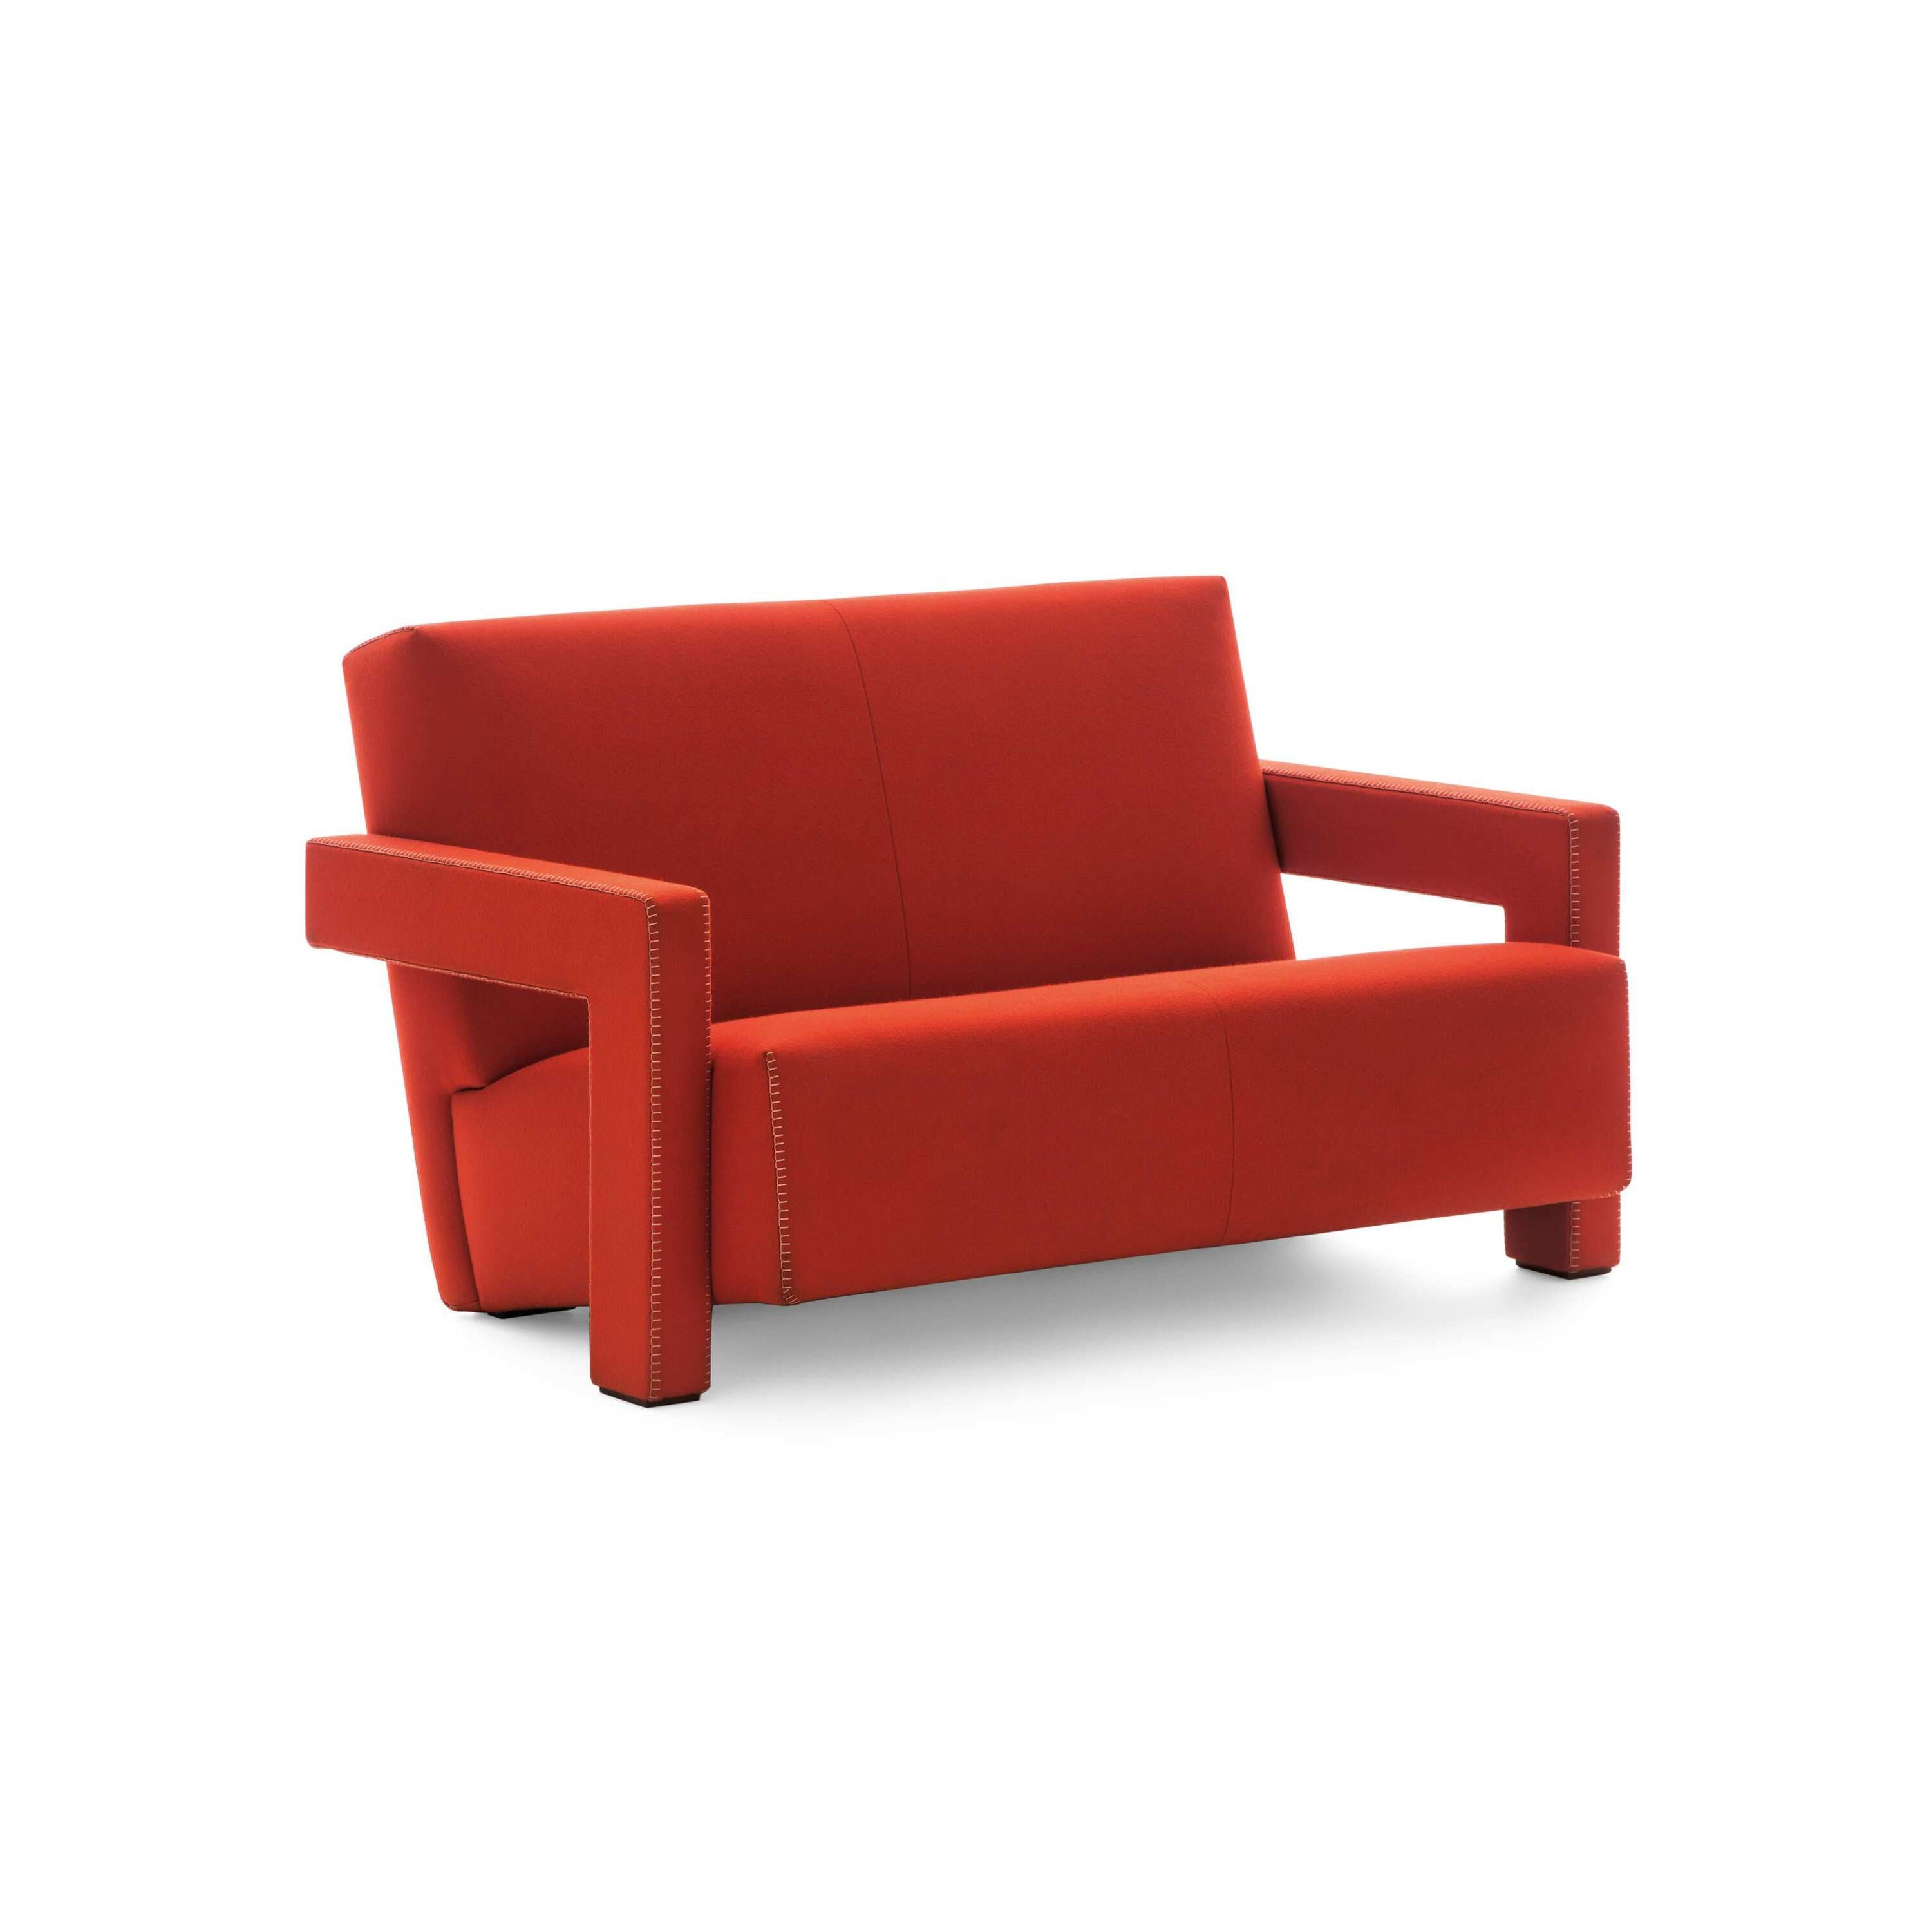 Armchair designed by Gerrit Thomas Rietveld in 1935. Relaunched in 2015.

Wide Version.

Manufactured by Cassina in Italy.

Gerrit T. Rietveld came up with the design for the Utrecht armchair in 1935 while working for the Metz & Co. department